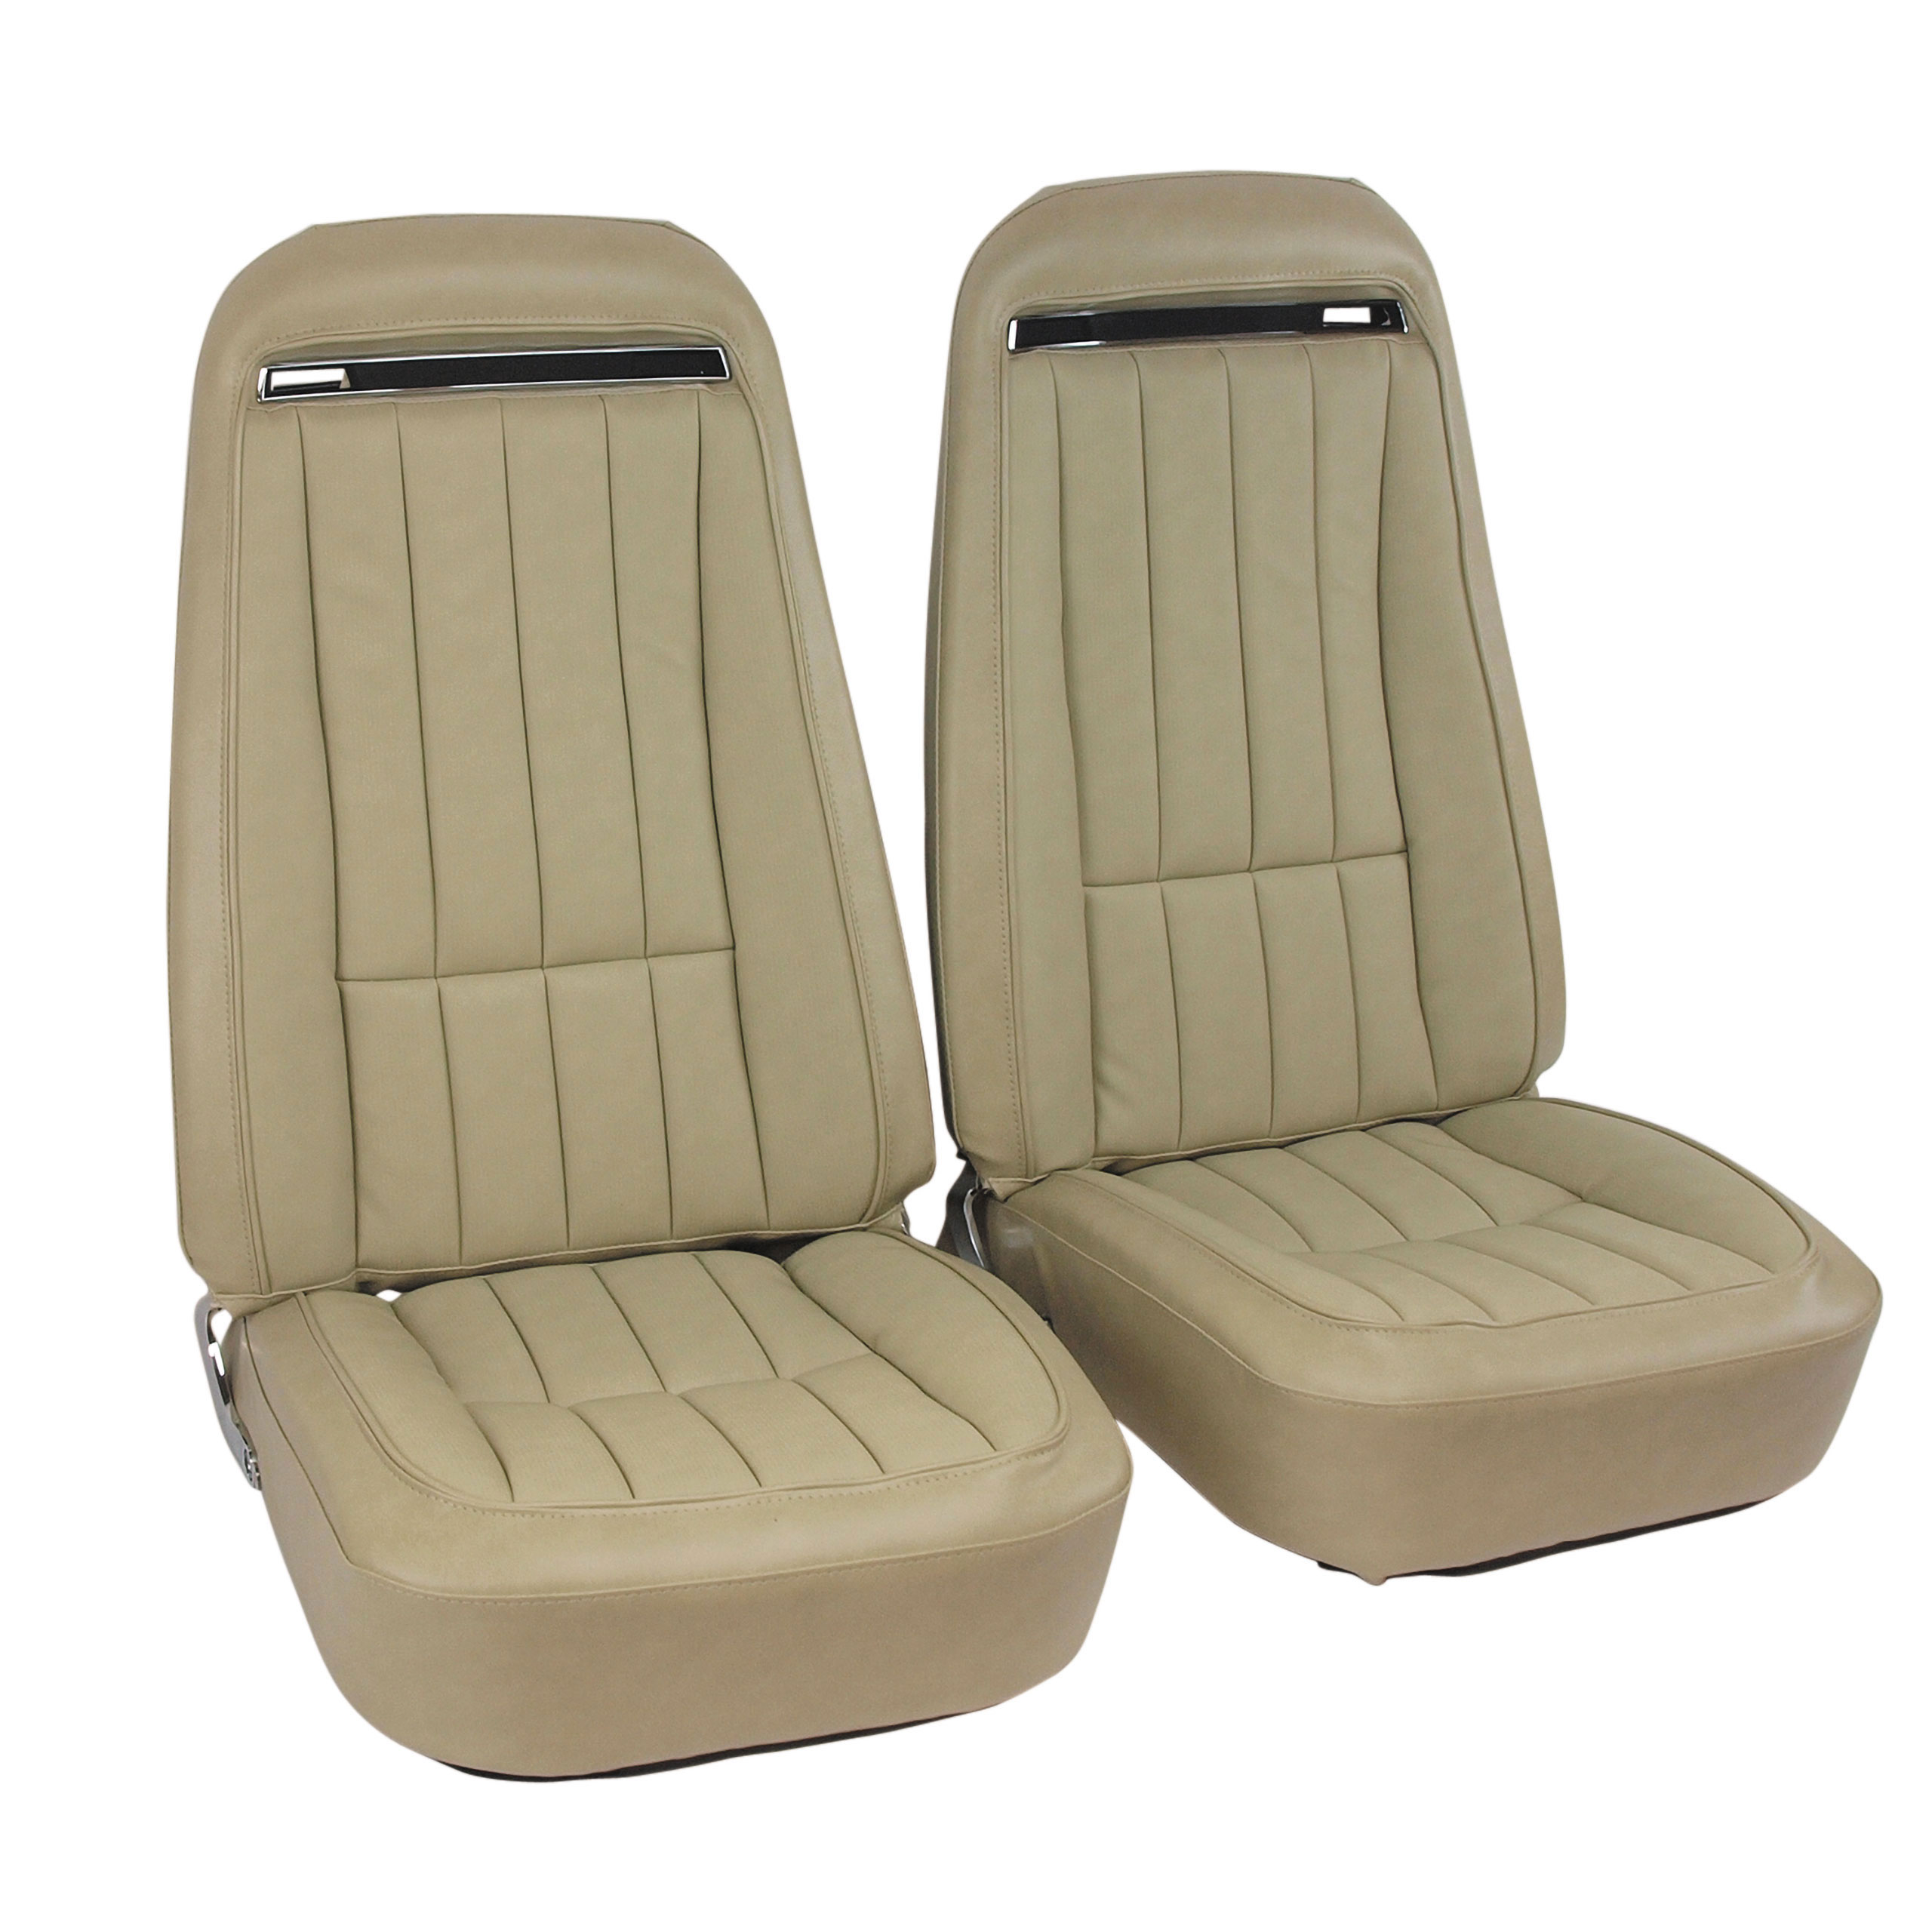 1975 C3 Corvette Mounted Seats Neutral "Leather-Like" Vinyl Without Shoulder Harness